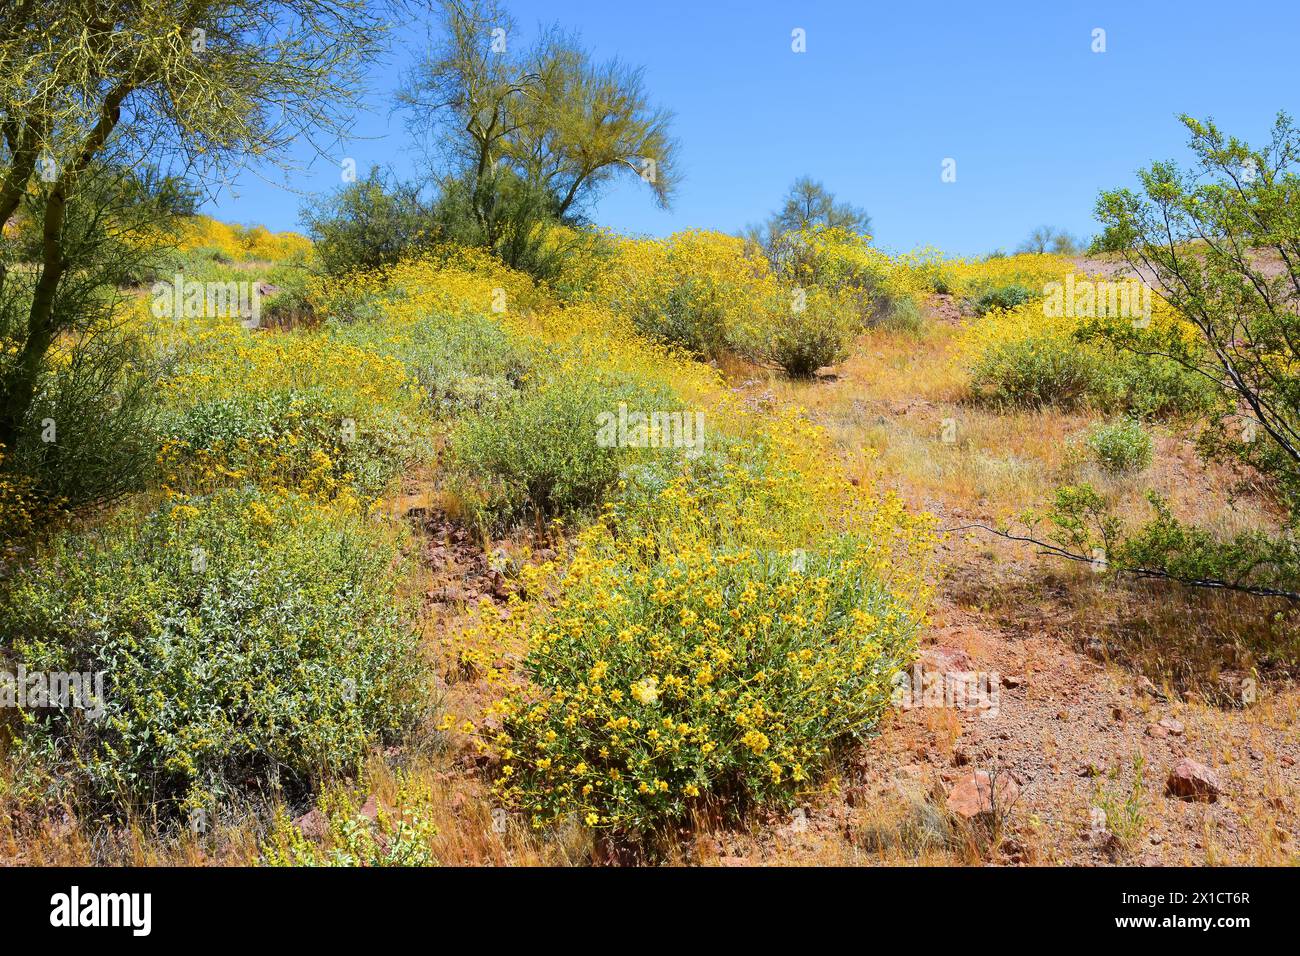 The Vast Sonora desert in central Arizona USA on a early spring morning with wild flowers Brittlebush and Texas Bluebonnets Stock Photo